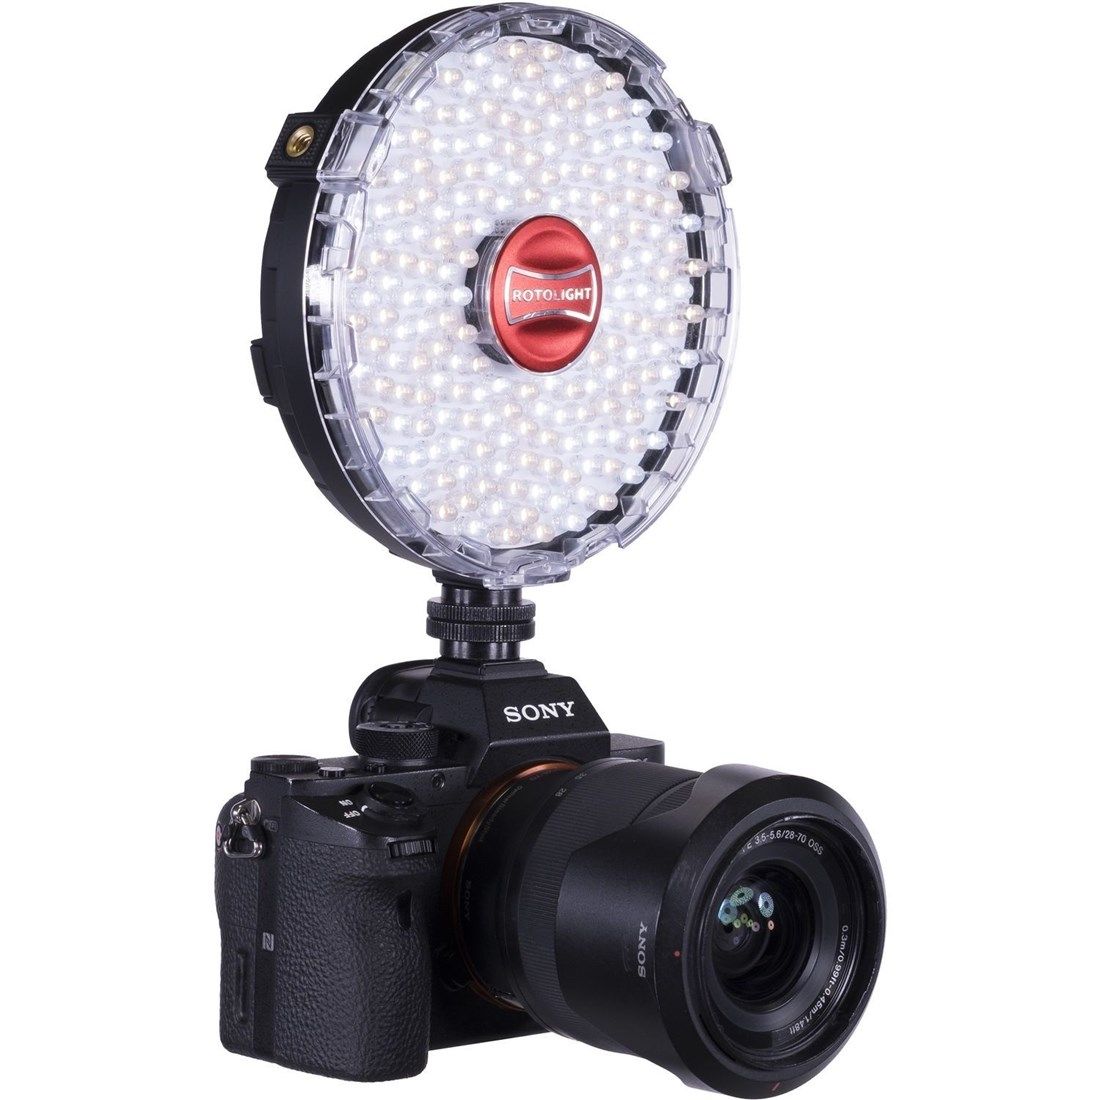 Rotolight Neo 2 Continuous Led Advanced Video Light with High Speed Flash